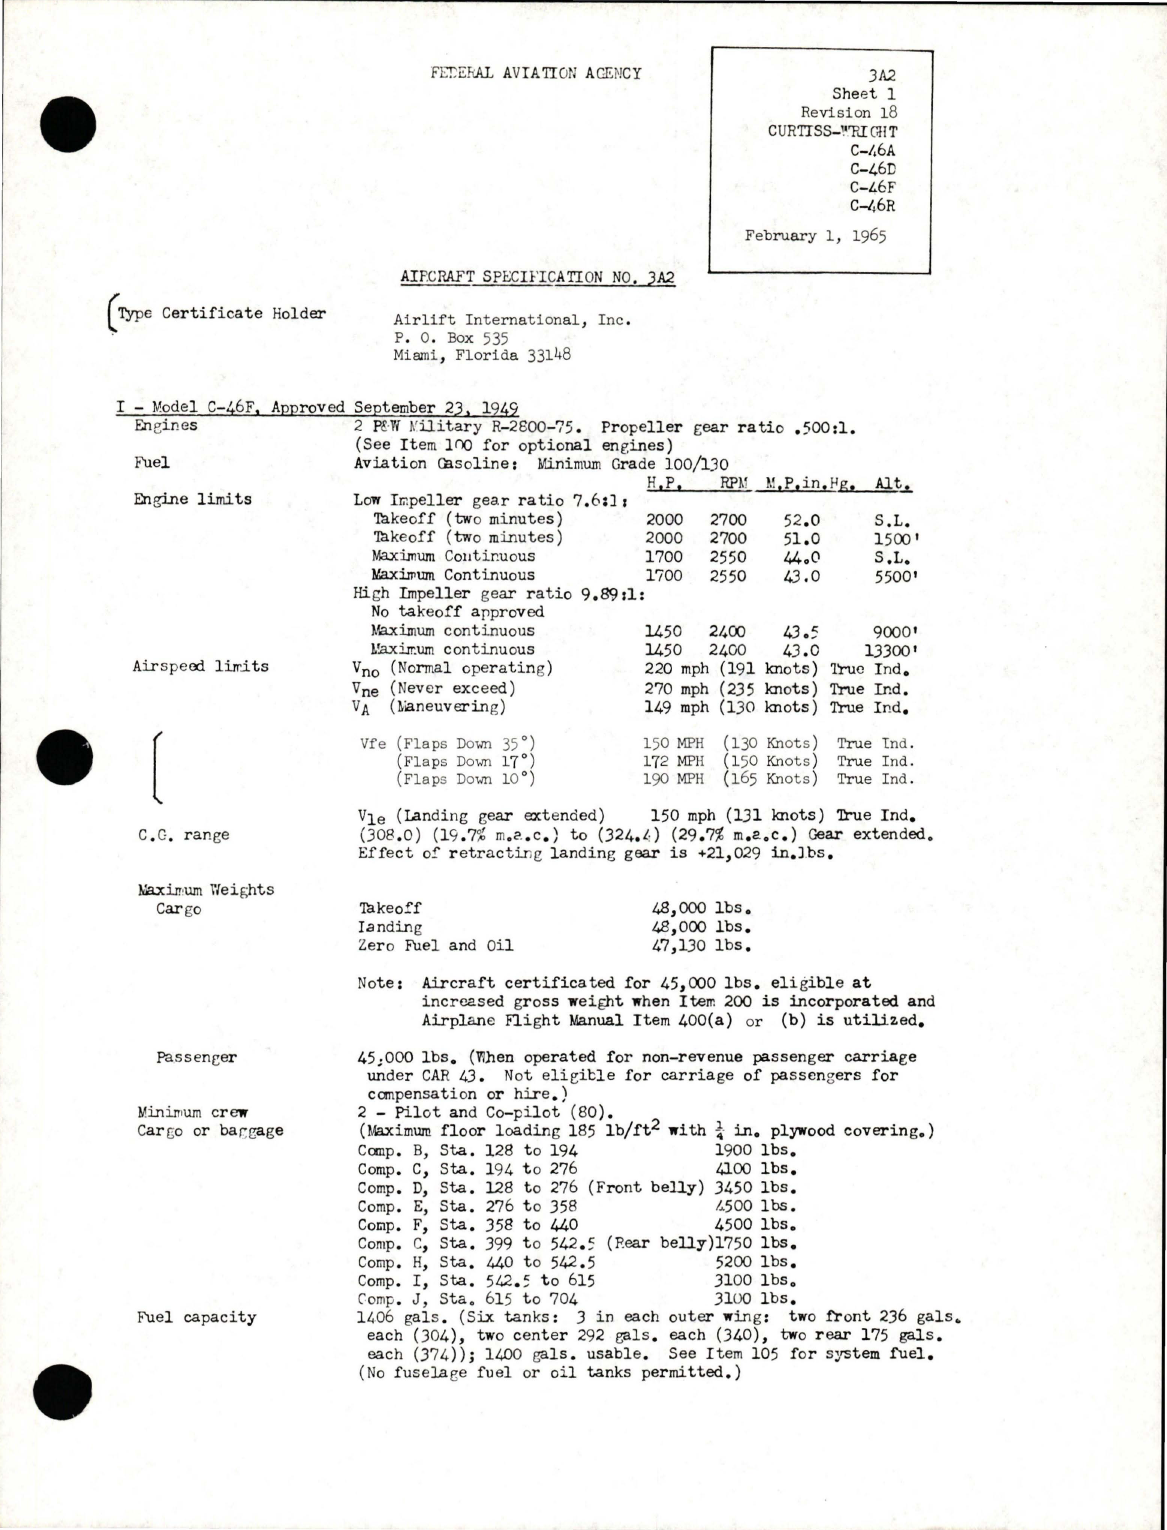 Sample page 1 from AirCorps Library document: C-46A, C-46D, C-46F, C-46R